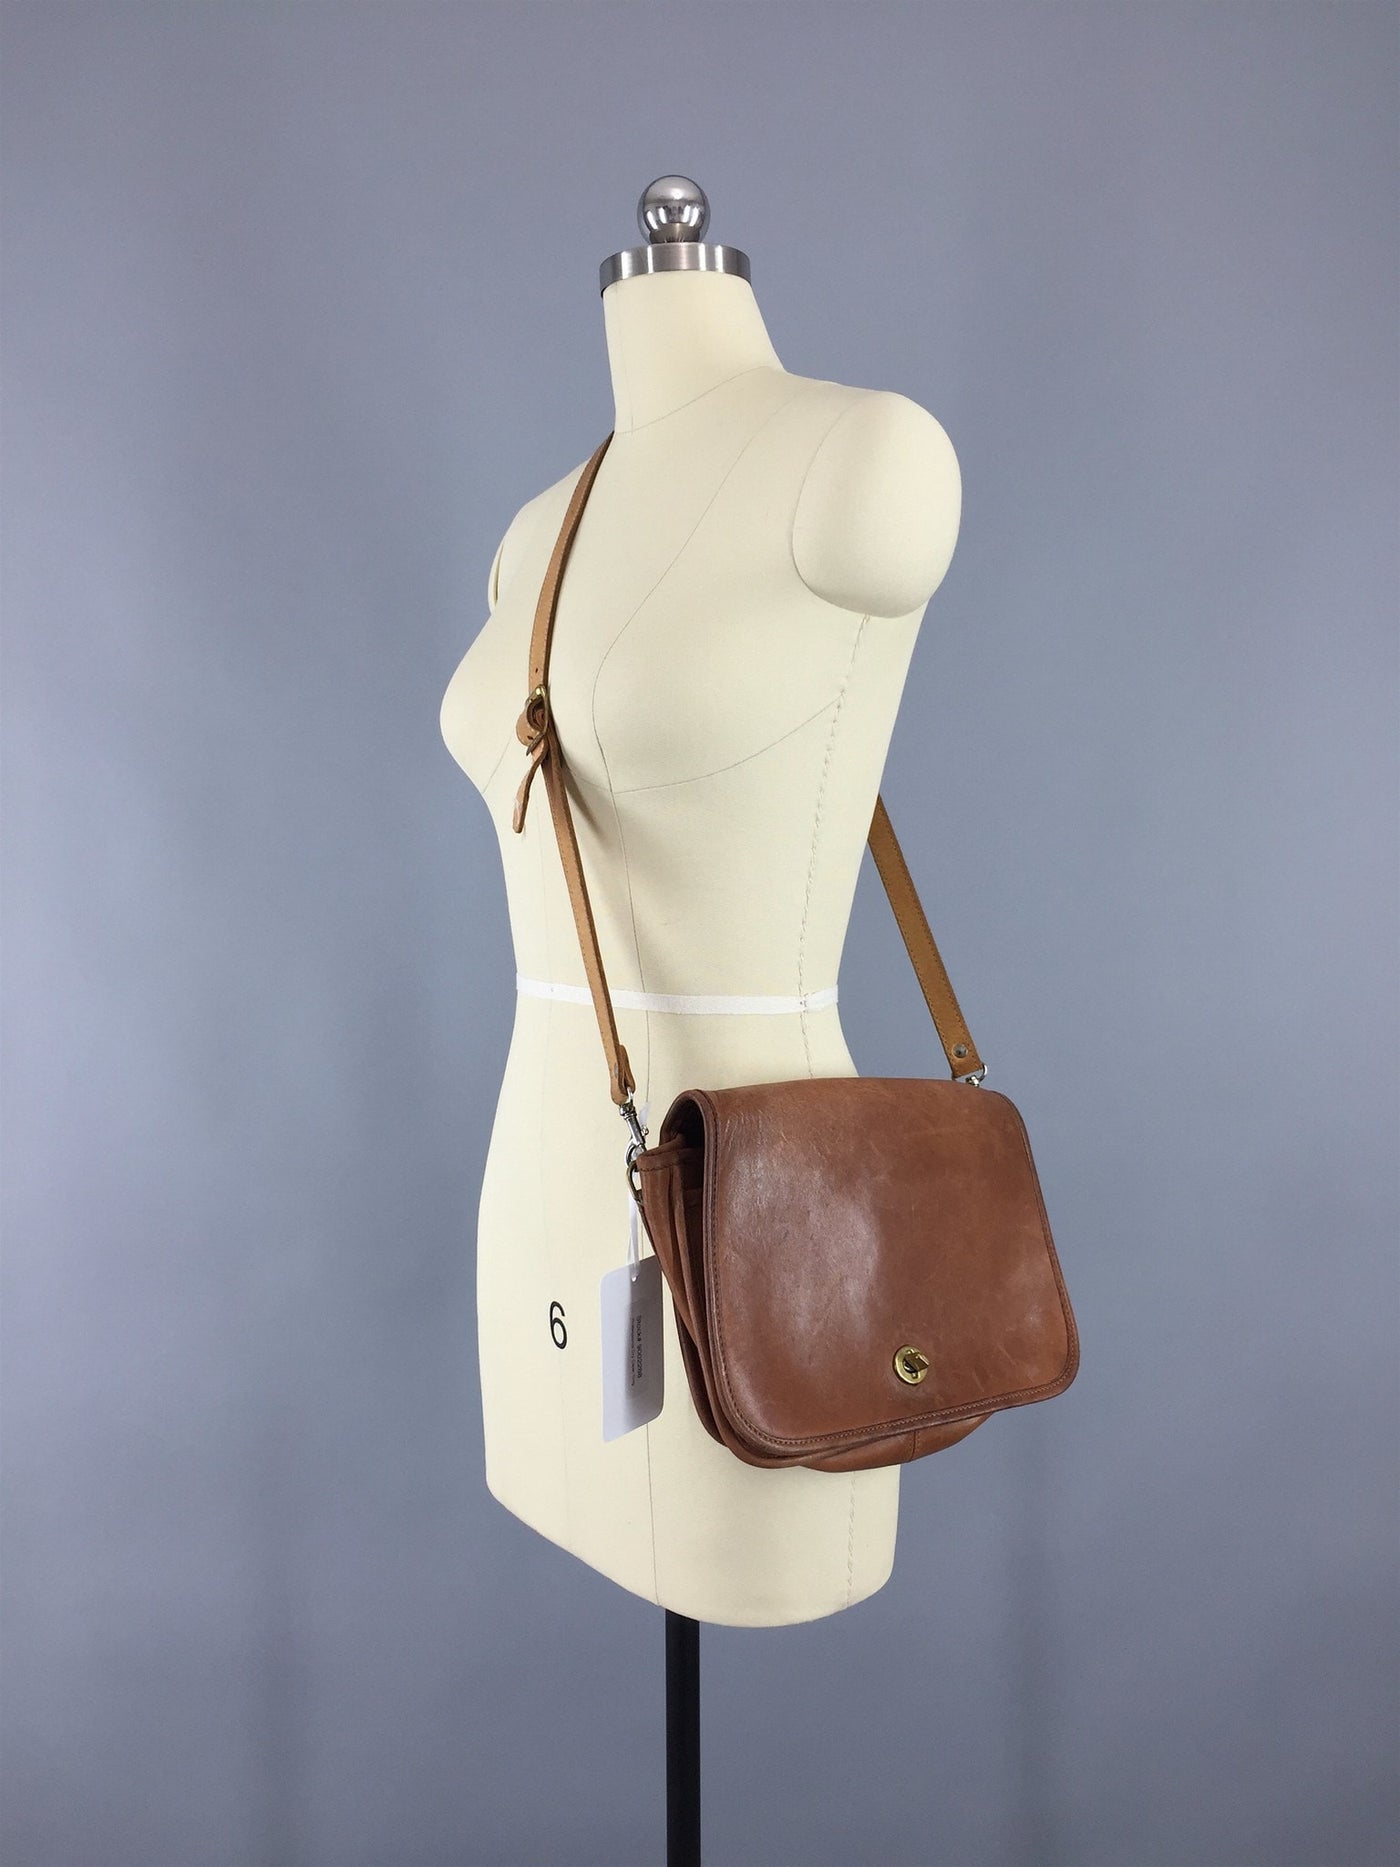 Vintage 1970s Coach Bag / Brown Leather Cross Body Purse - ThisBlueBird